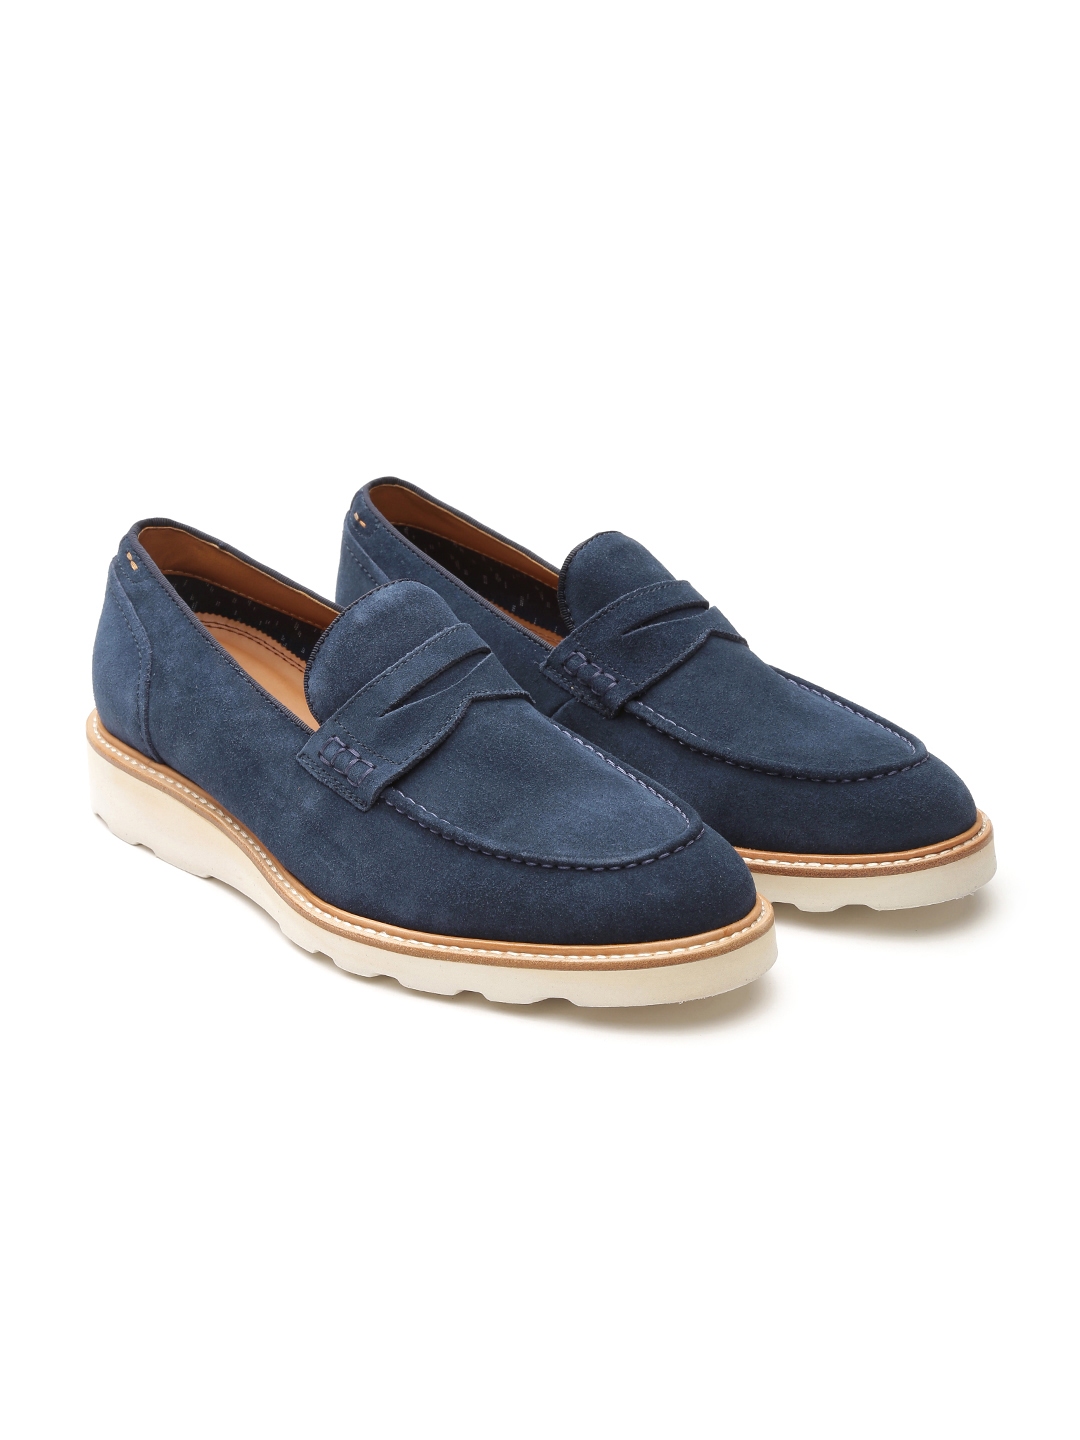 mens suede loafers navy